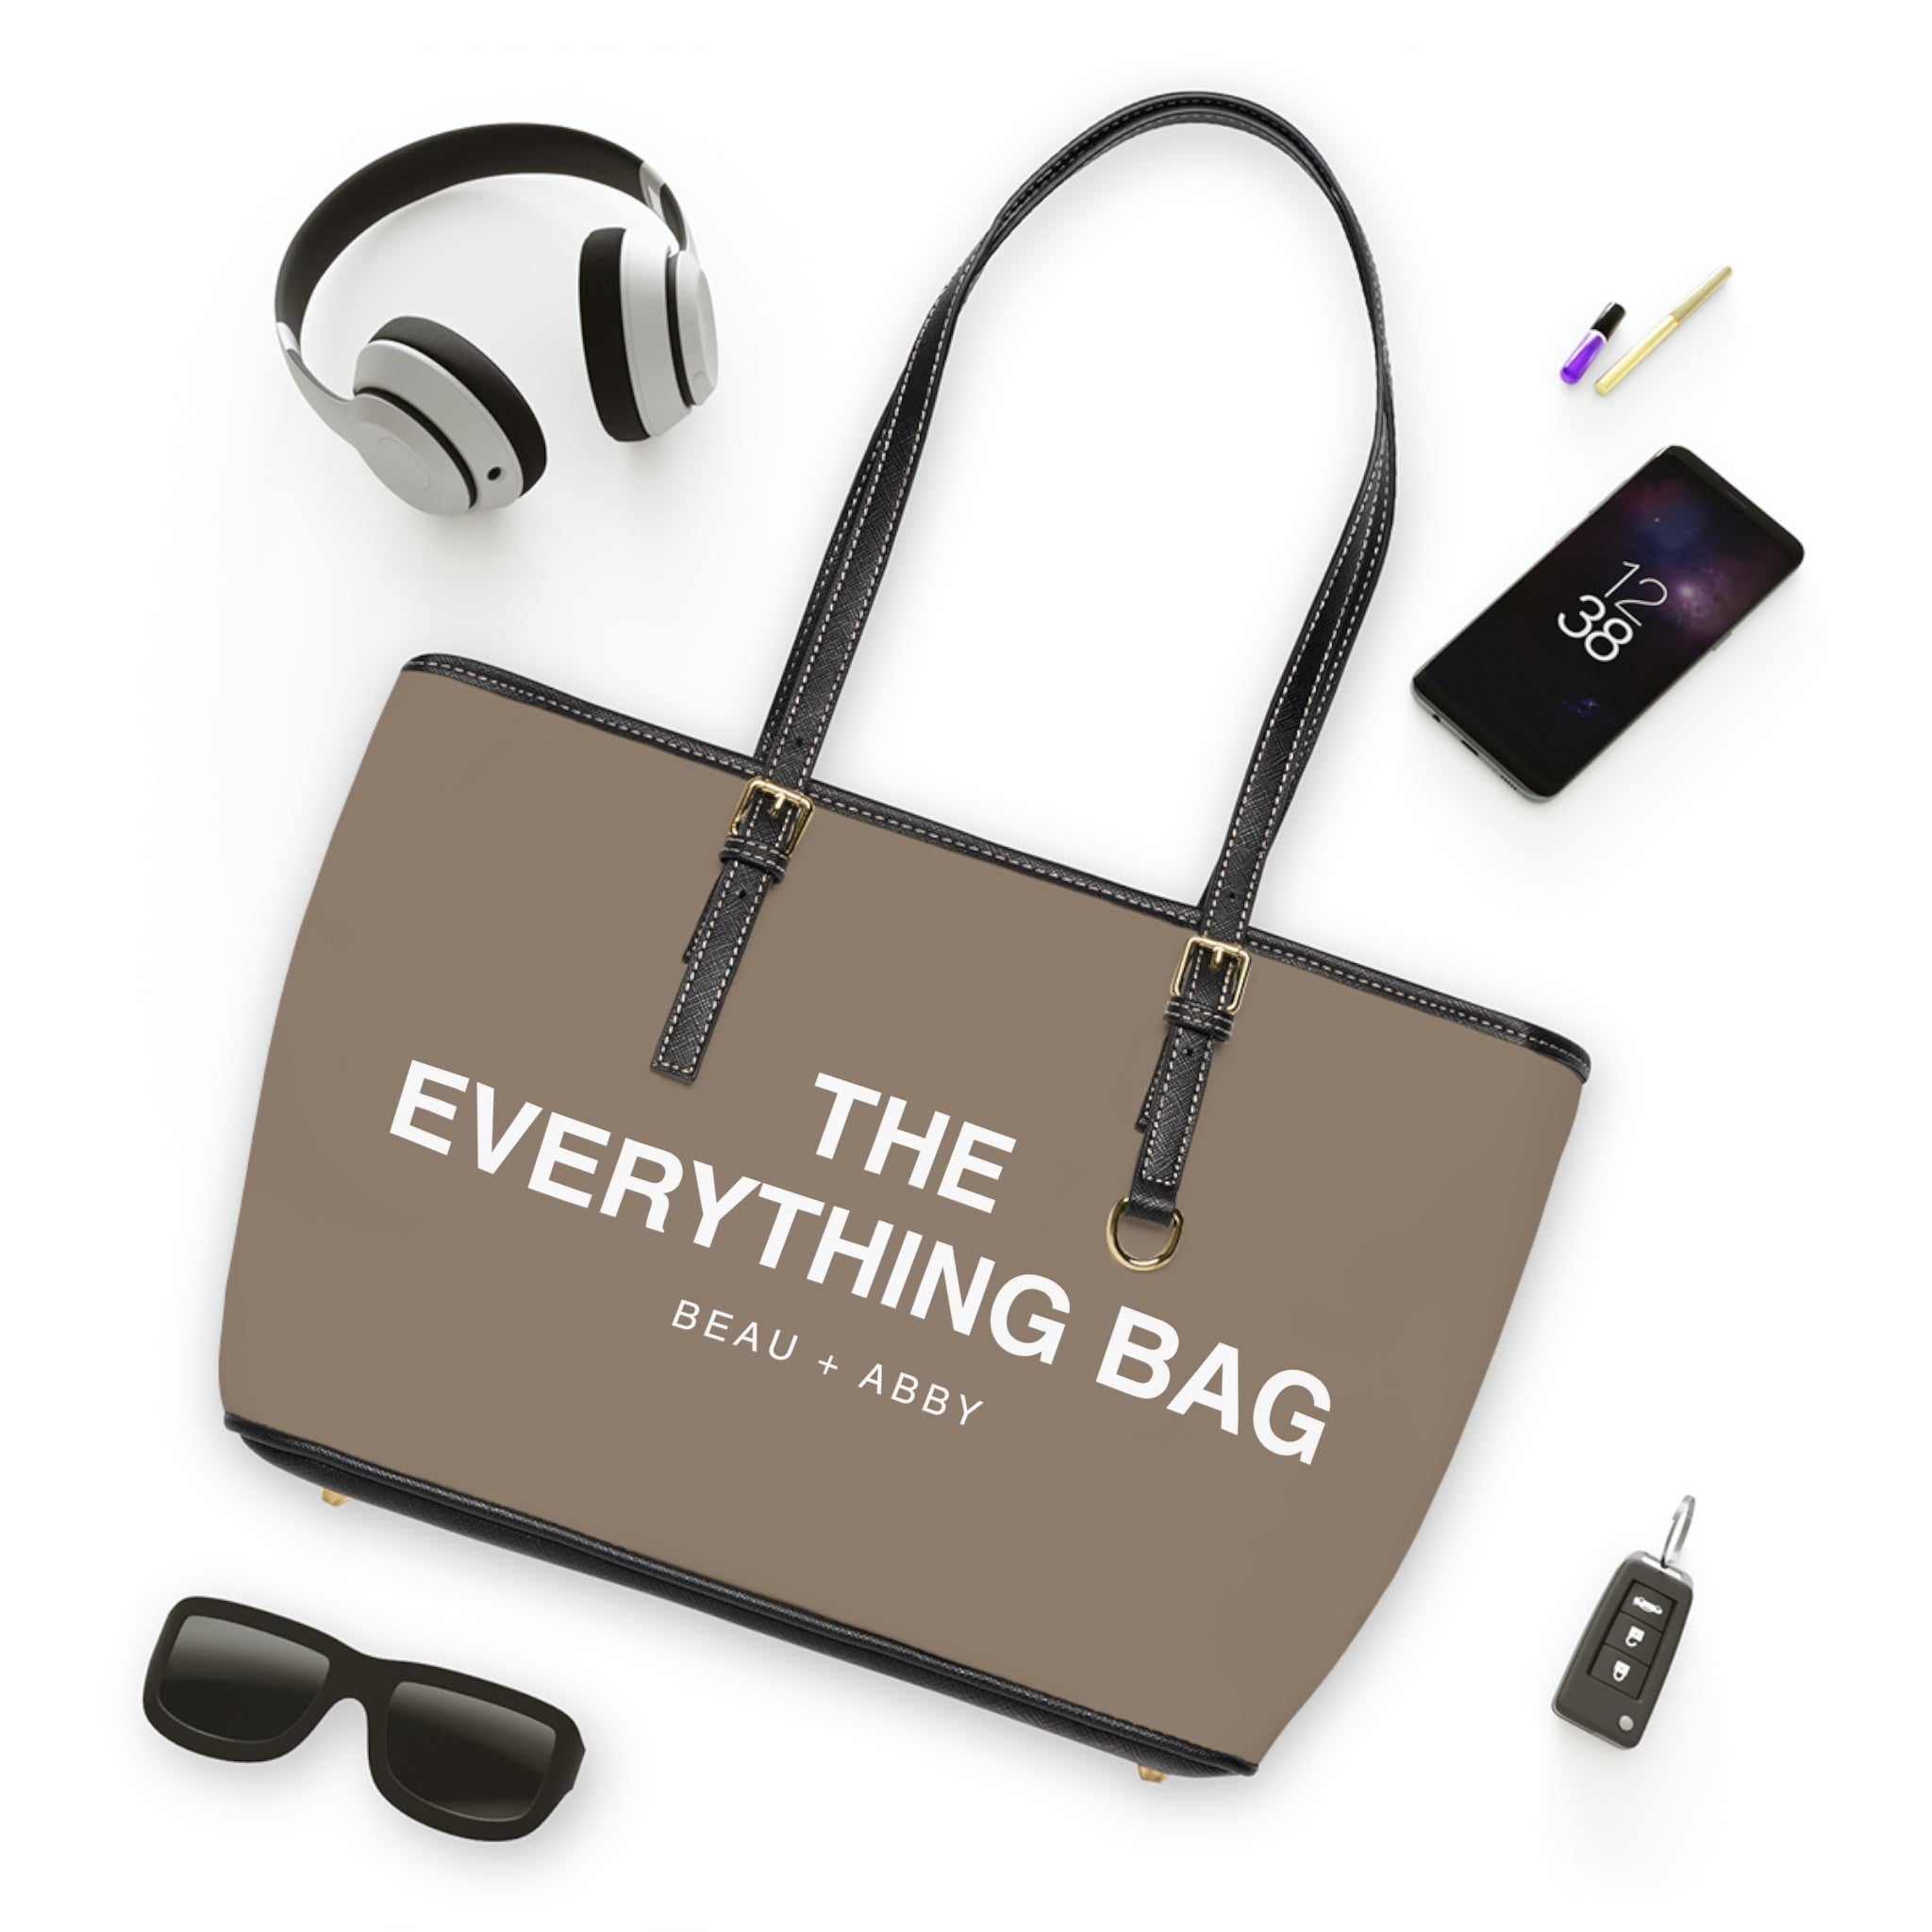 Casual Wear Accessories "Everything Bag" PU Leather Shoulder Bag in Taupe, Tote Bag